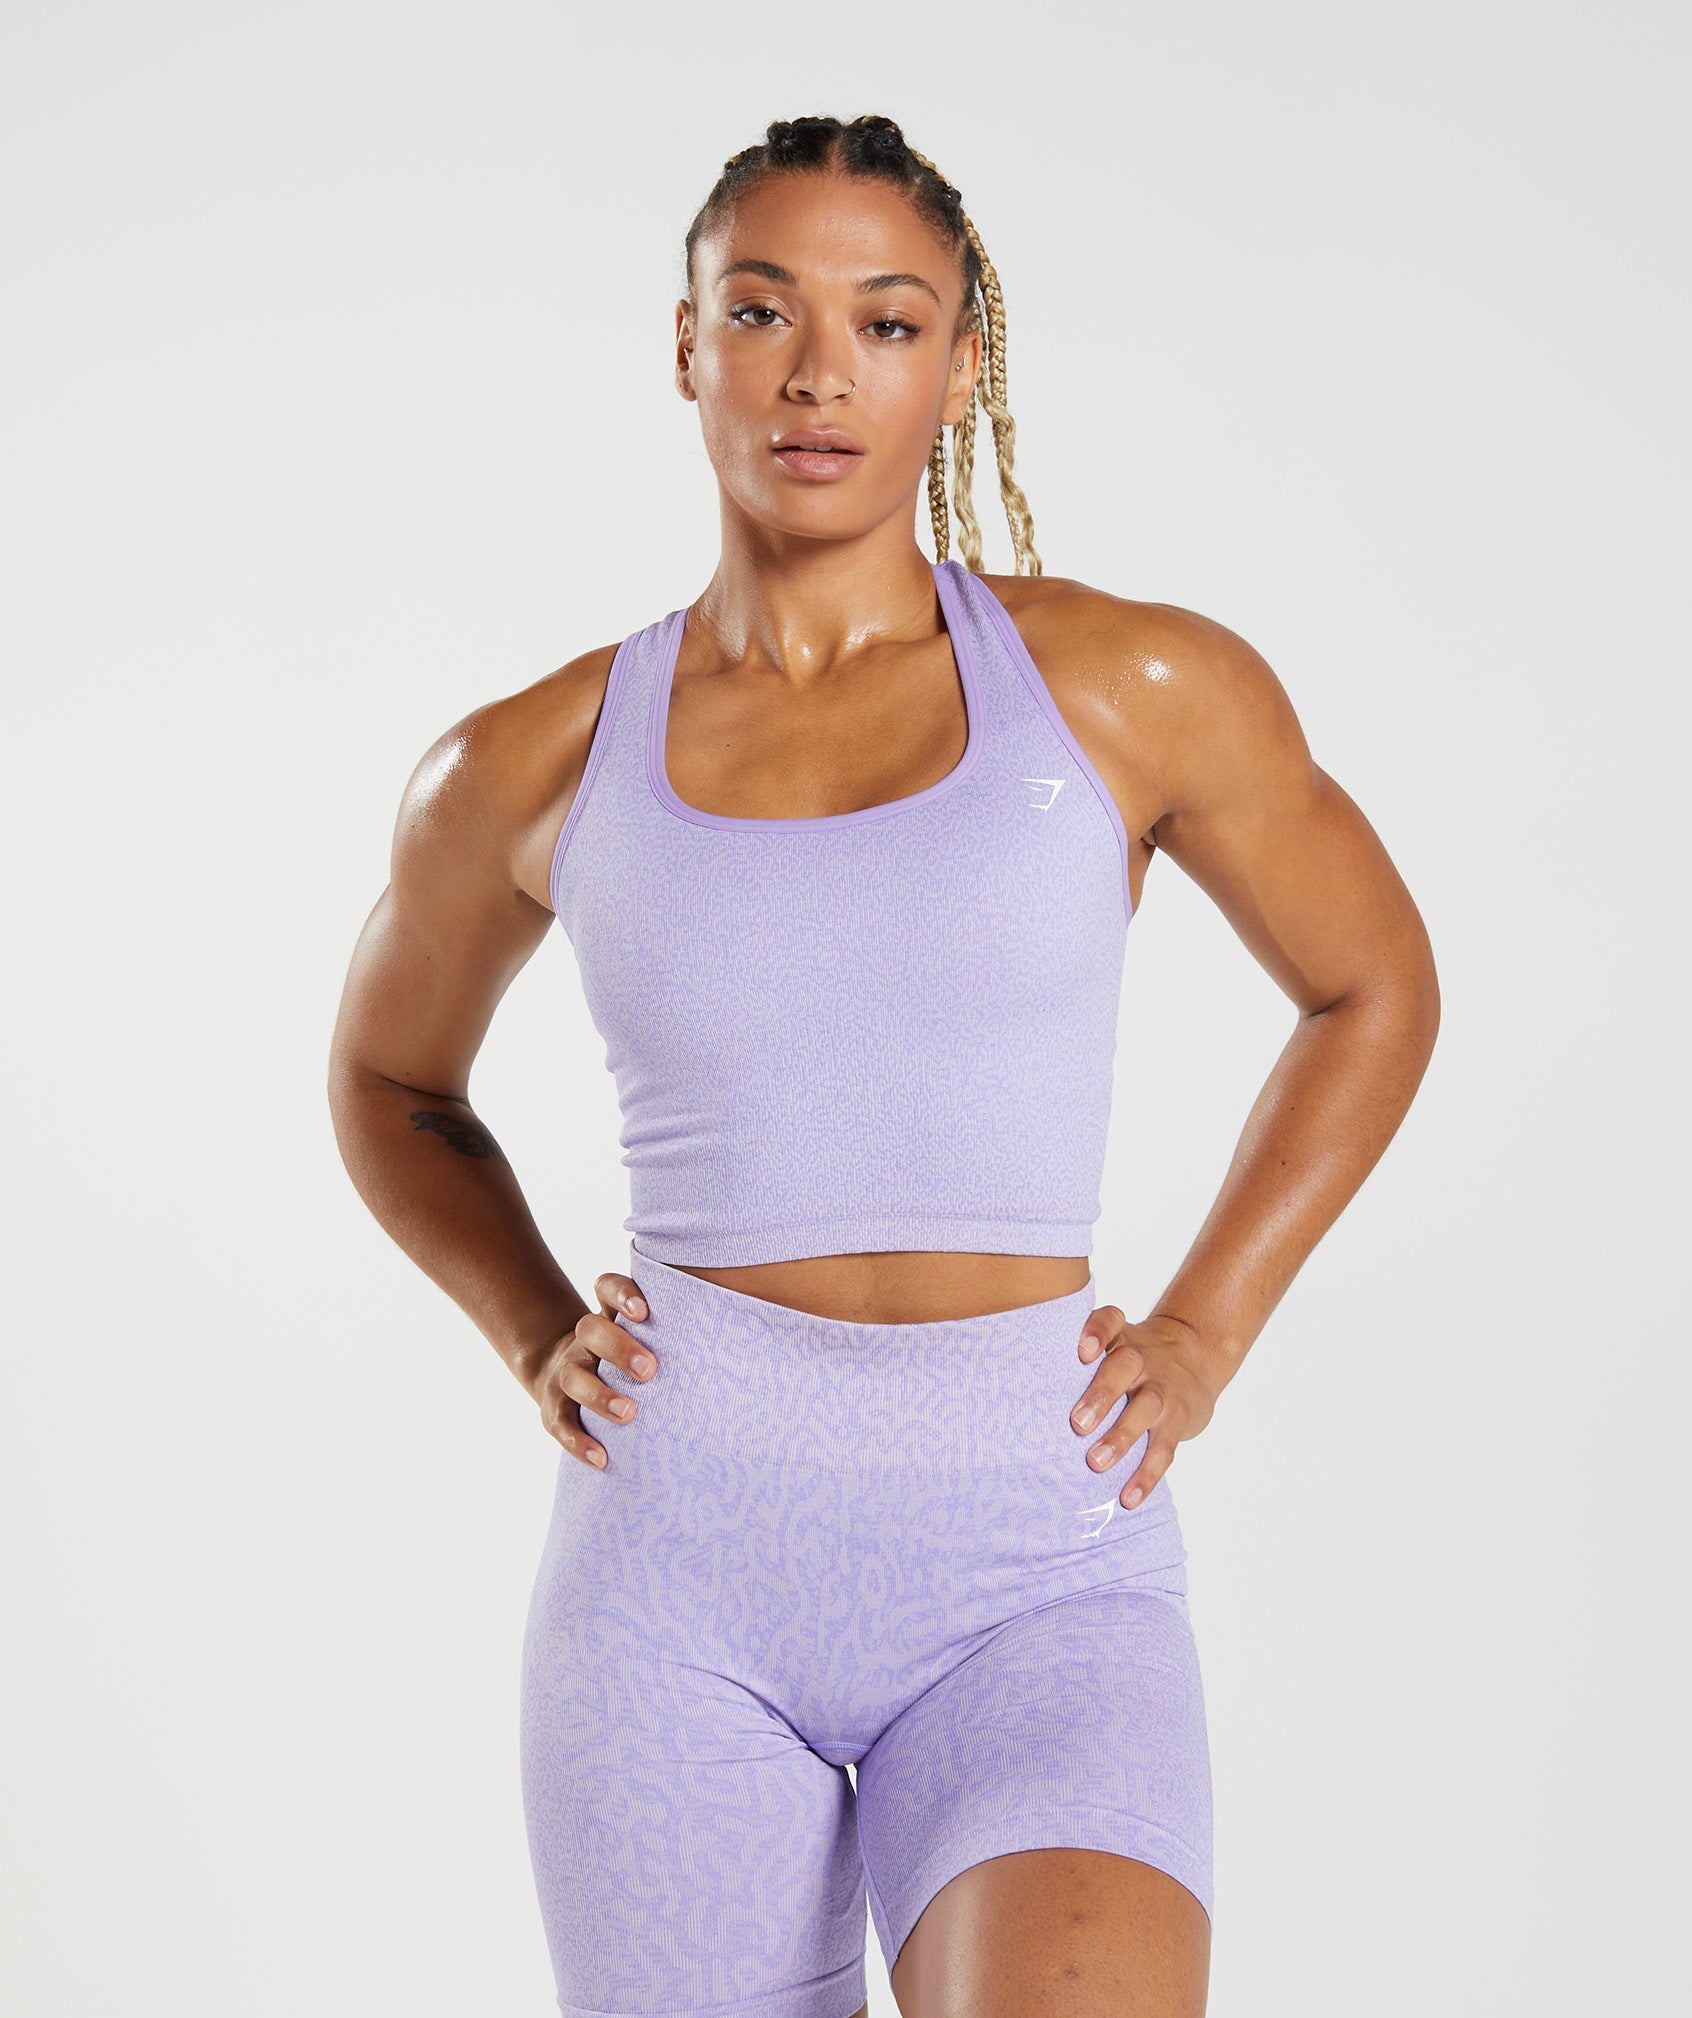 I'm Looking for Comparable Tops to Legacy Fitness Cropped Tank : r/Gymshark